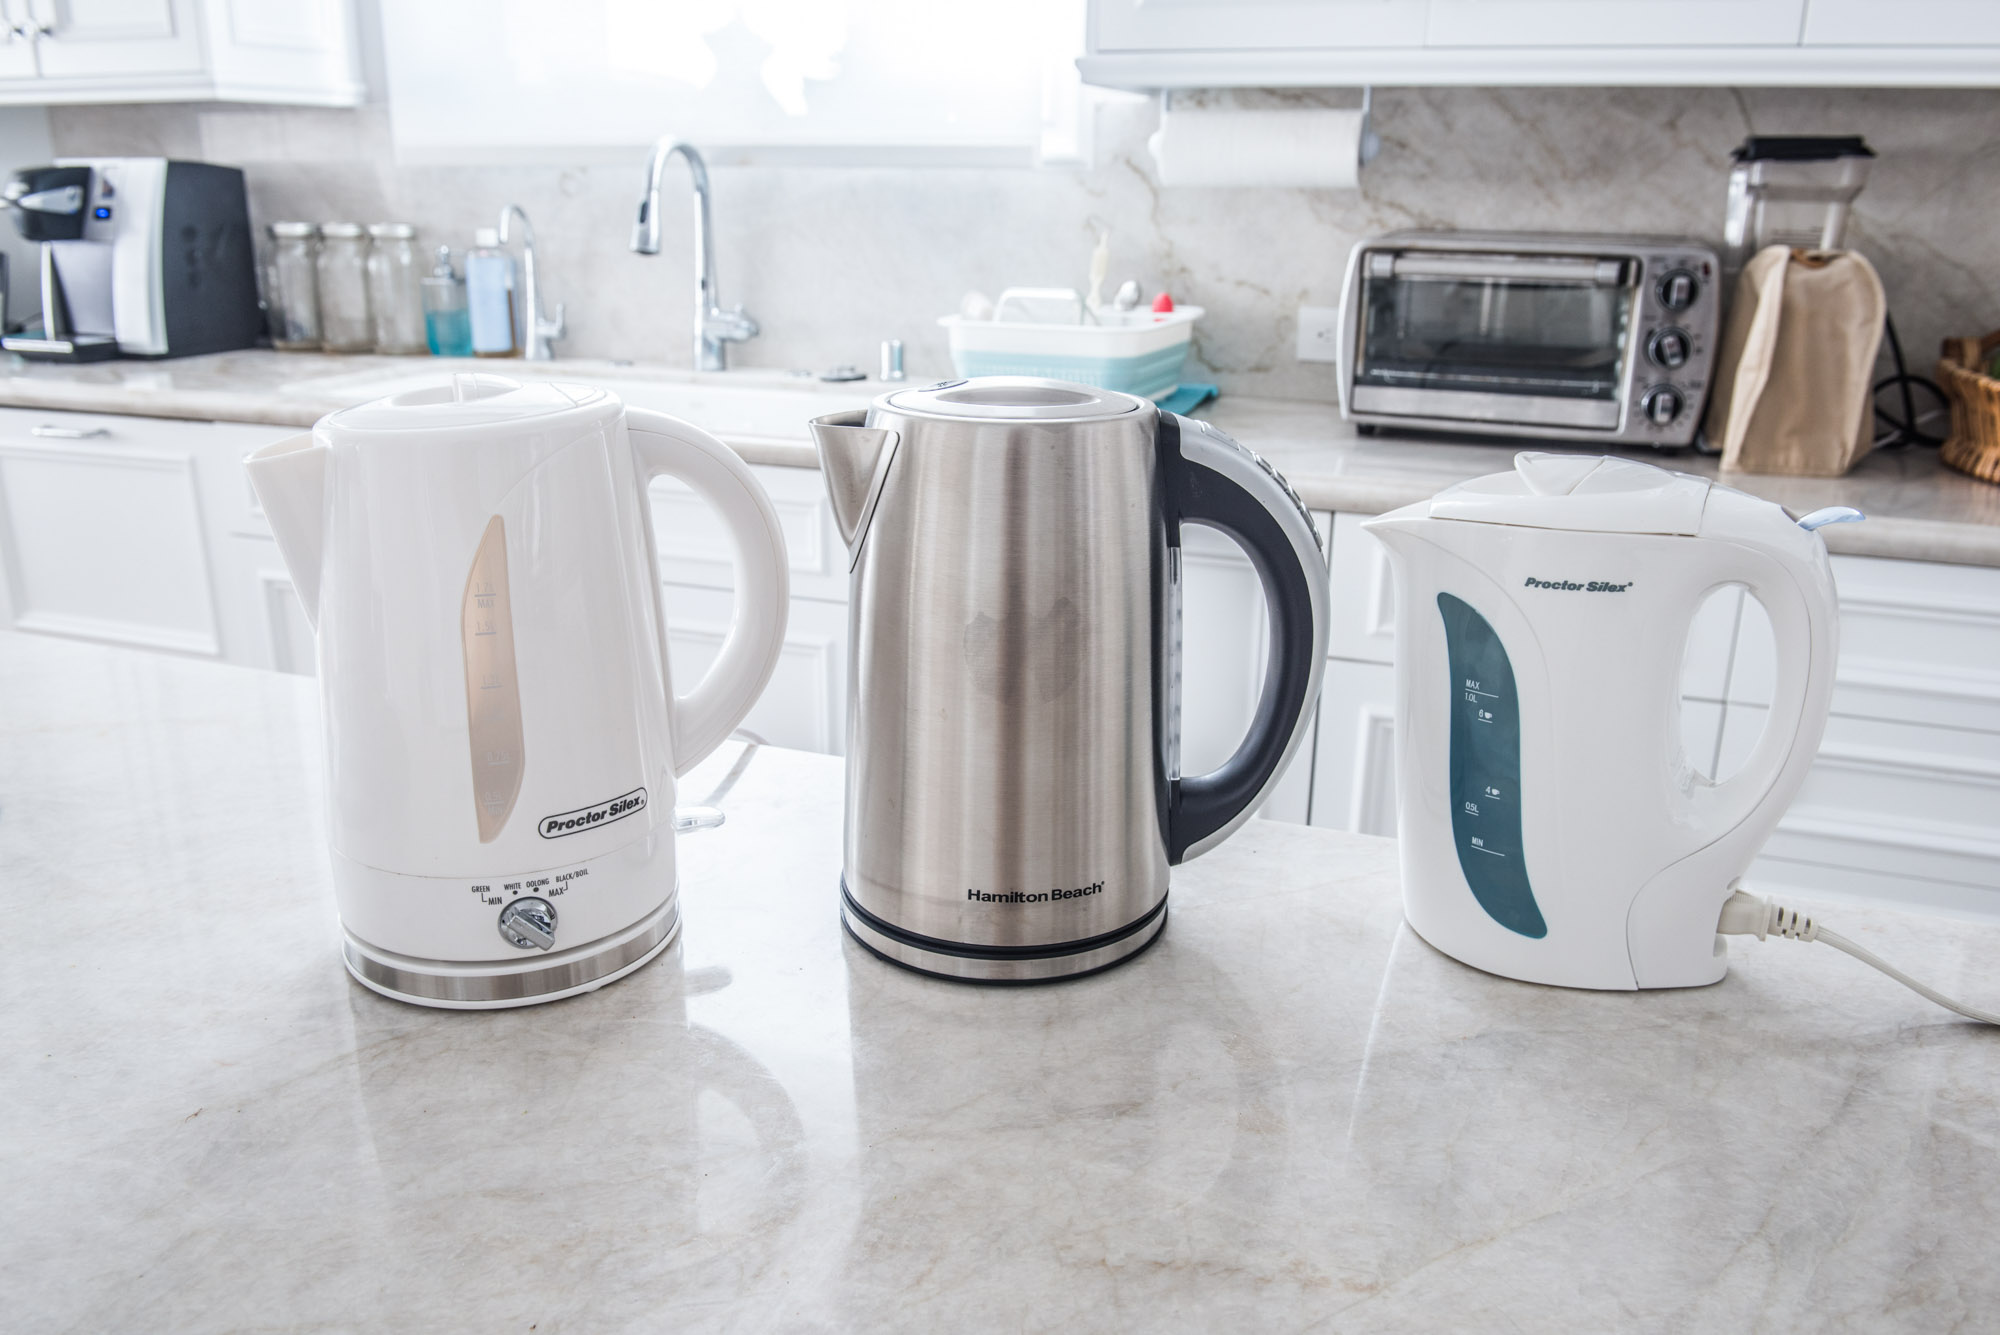 Cuisinart Electric Kettle CPK-17P1 In-depth Review